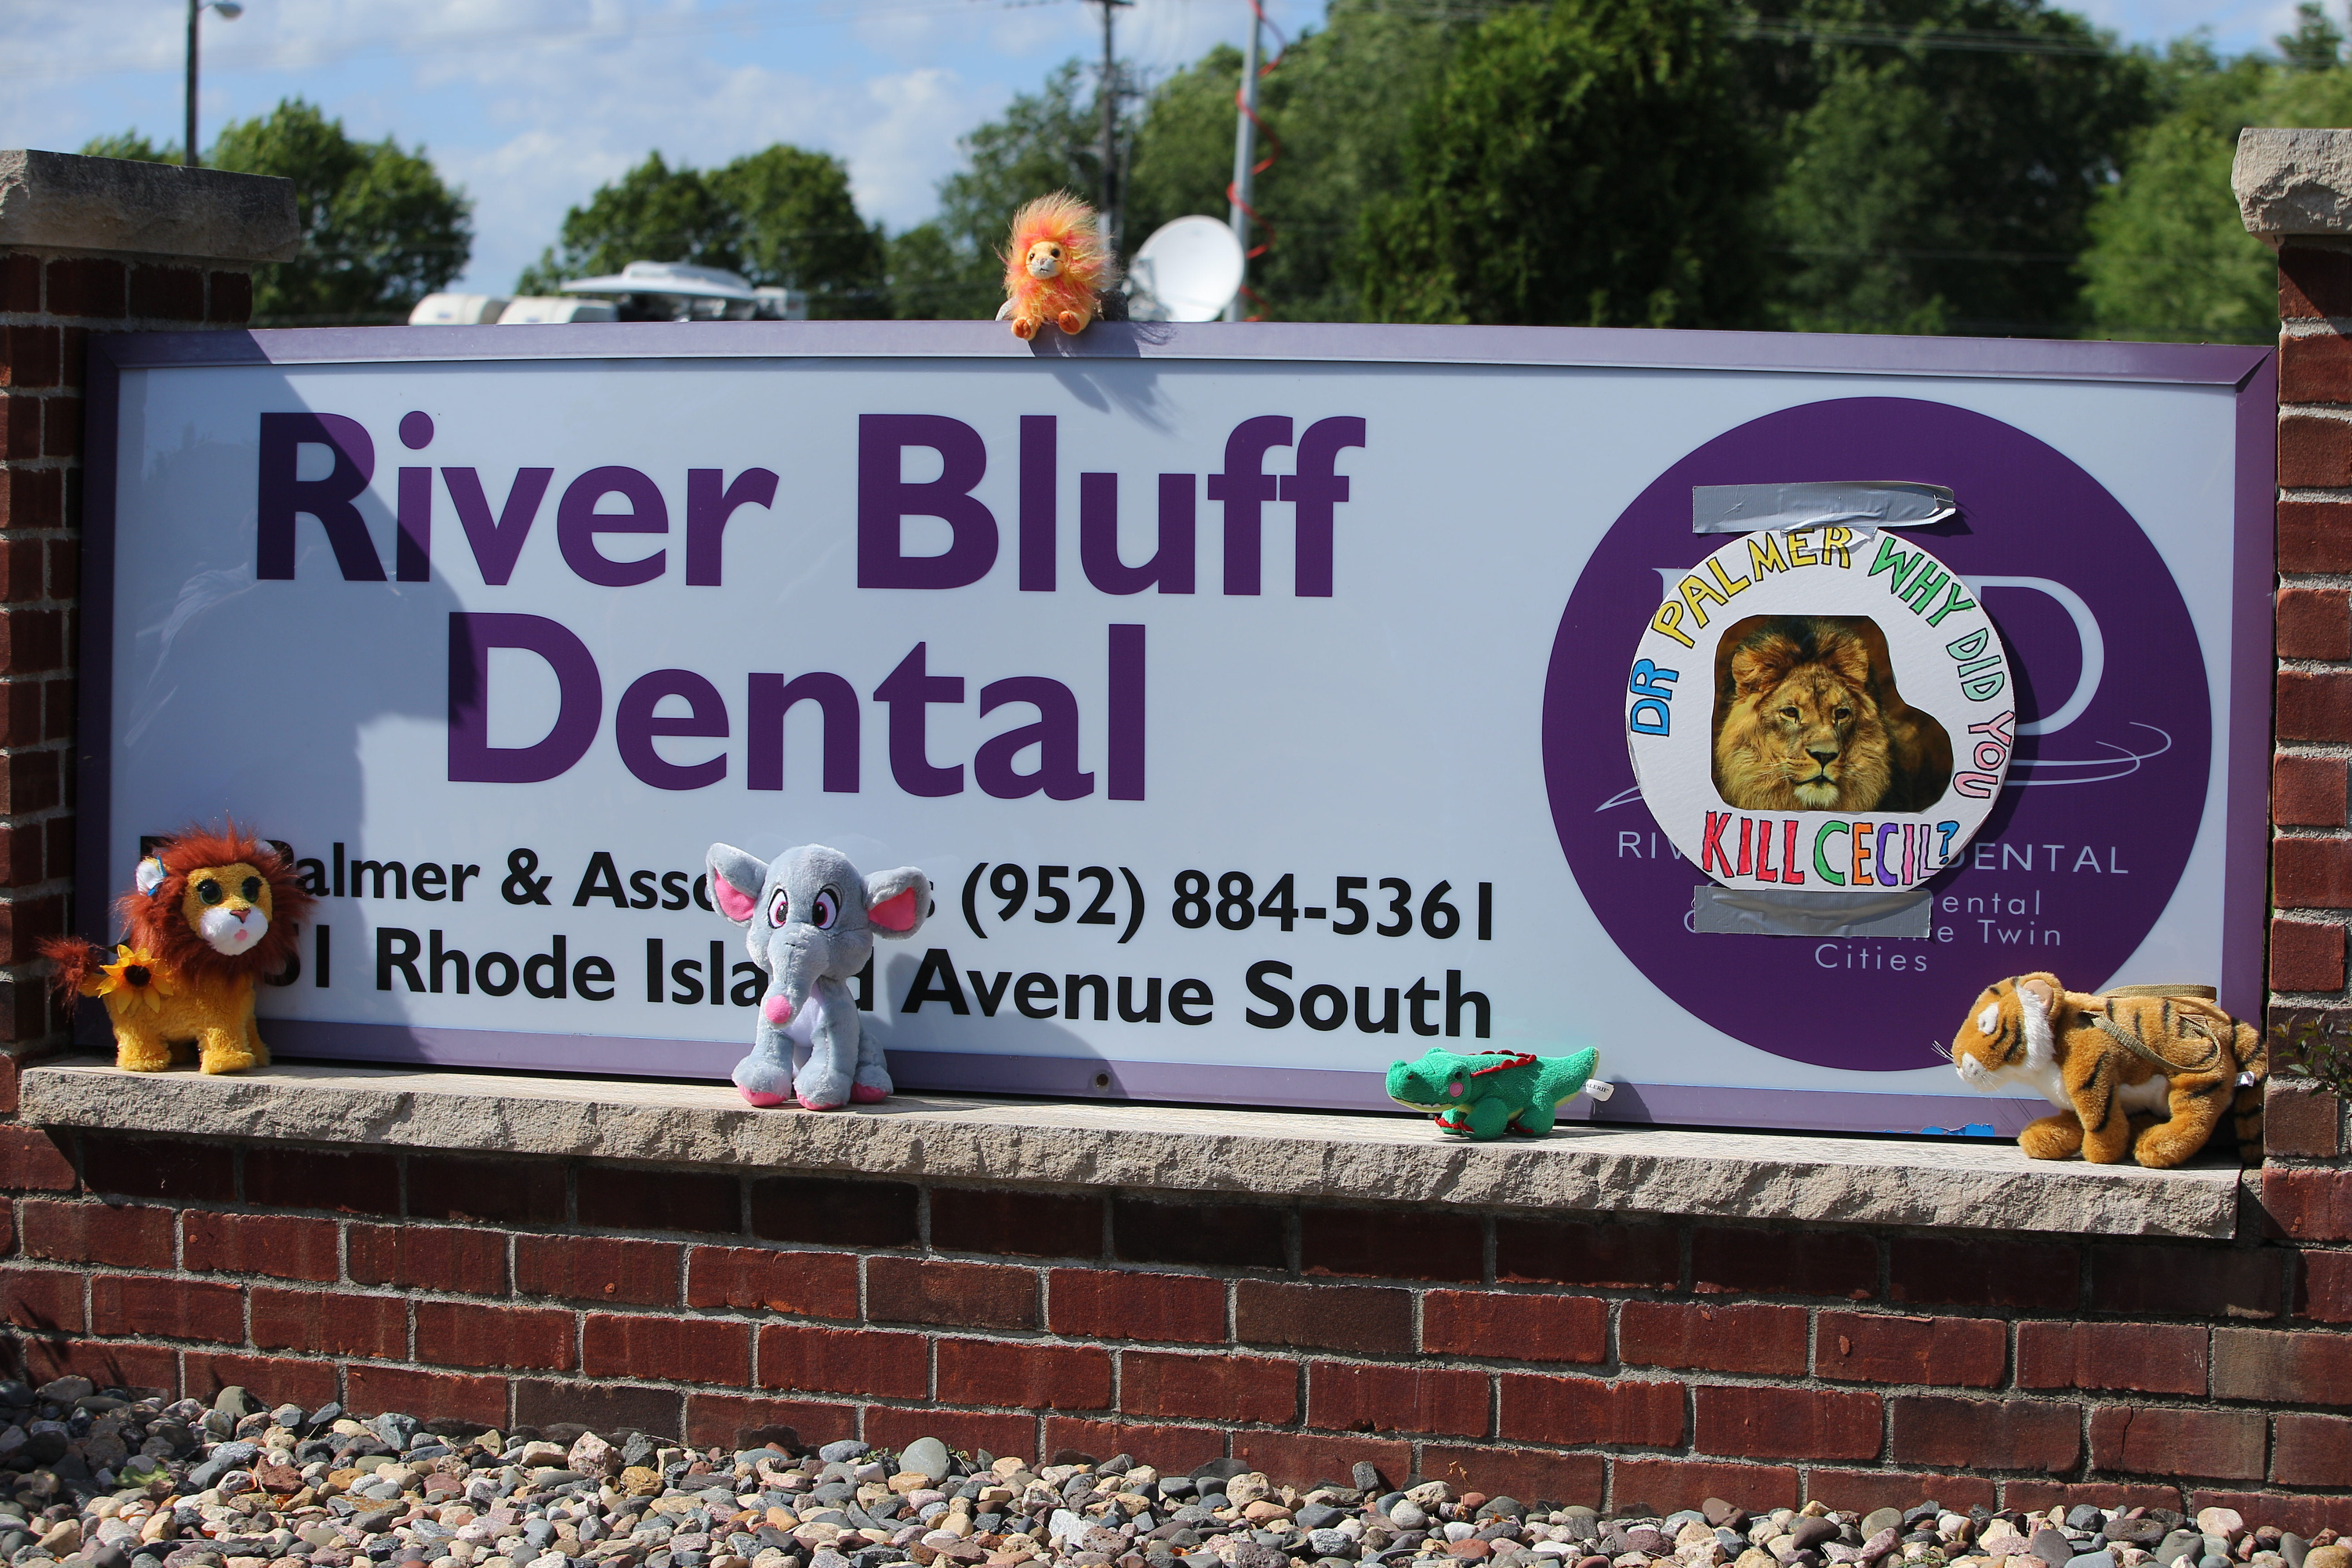 Protesters place stuffed animals on the sign of  Dr. Walter Palmer's River Bluff Dental Clinic to call attention to the alleged poaching of Cecil the lion on July 29, 2015 in Bloomington, Minnesota. According to reports, the 13-year-old lion was lured out of a national park in Zimbabwe and killed by Dr. Palmer, who had paid at least $50,000 for the hunt. (Photo by Adam Bettcher/Getty Images)